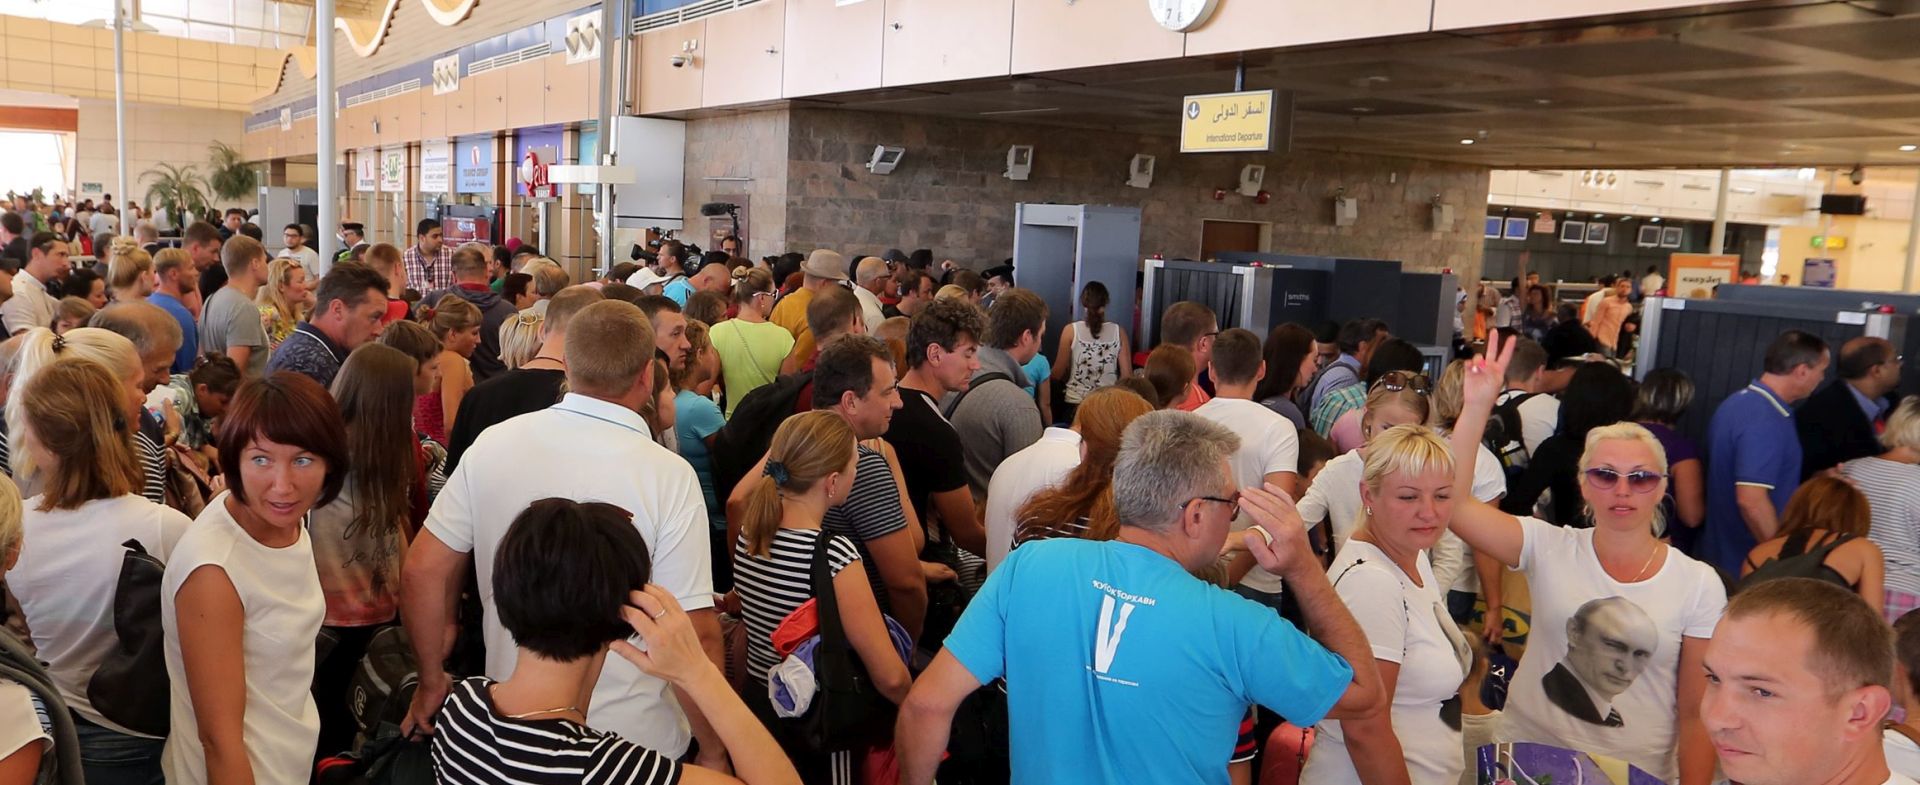 epa05013715 Tourists gather to check in at Sharm el-Sheikh airport, in Sharm el-Sheikh, Egypt, 06 November 2015. Airlines will begin flying stranded British tourists home 06 November after the government in London permitted flights from Egypt's Sharm el-Sheikh resort to resume. Earlier, British Prime Minister David Cameron maintained that the crash of a Russian passenger jet, which killed 224 people in Egypt, was 'more likely than not' caused by a bomb, despite Russian and Egyptian leaders' calls for all sides to await results of an official investigation.  EPA/KHALED ELFIQI  EPA/KHALED ELFIQI